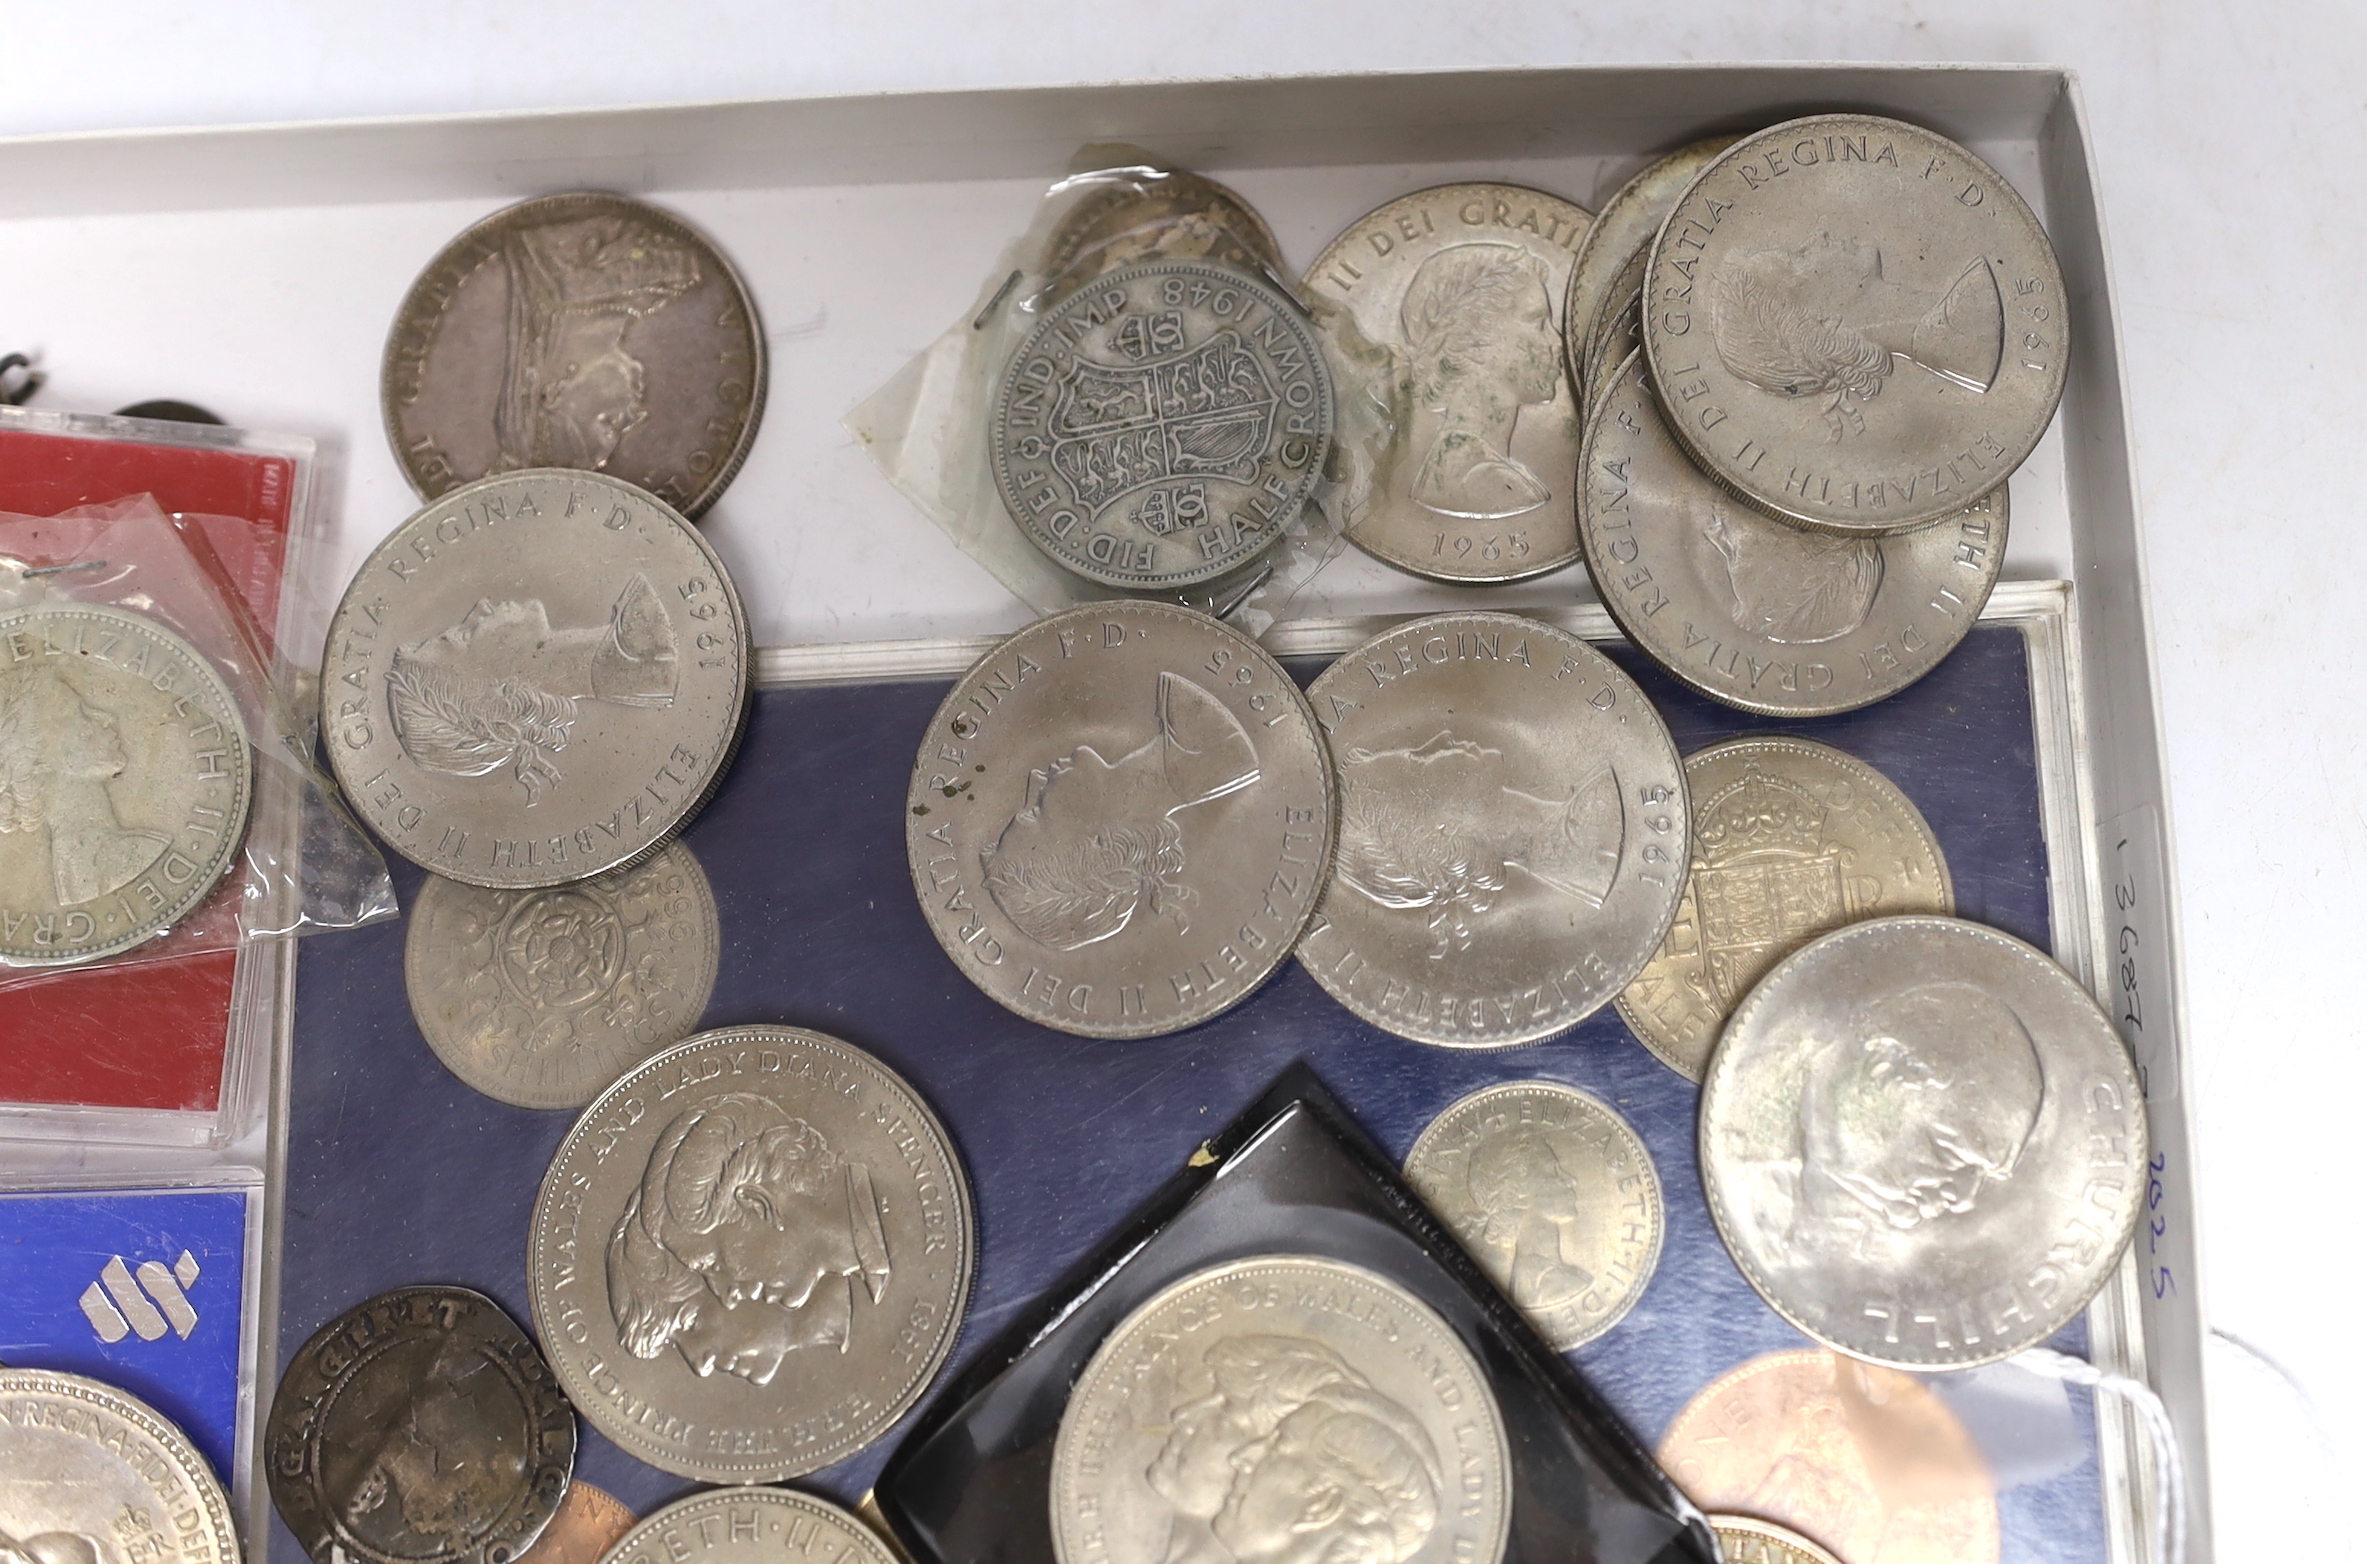 Assorted commemorative and other coins.